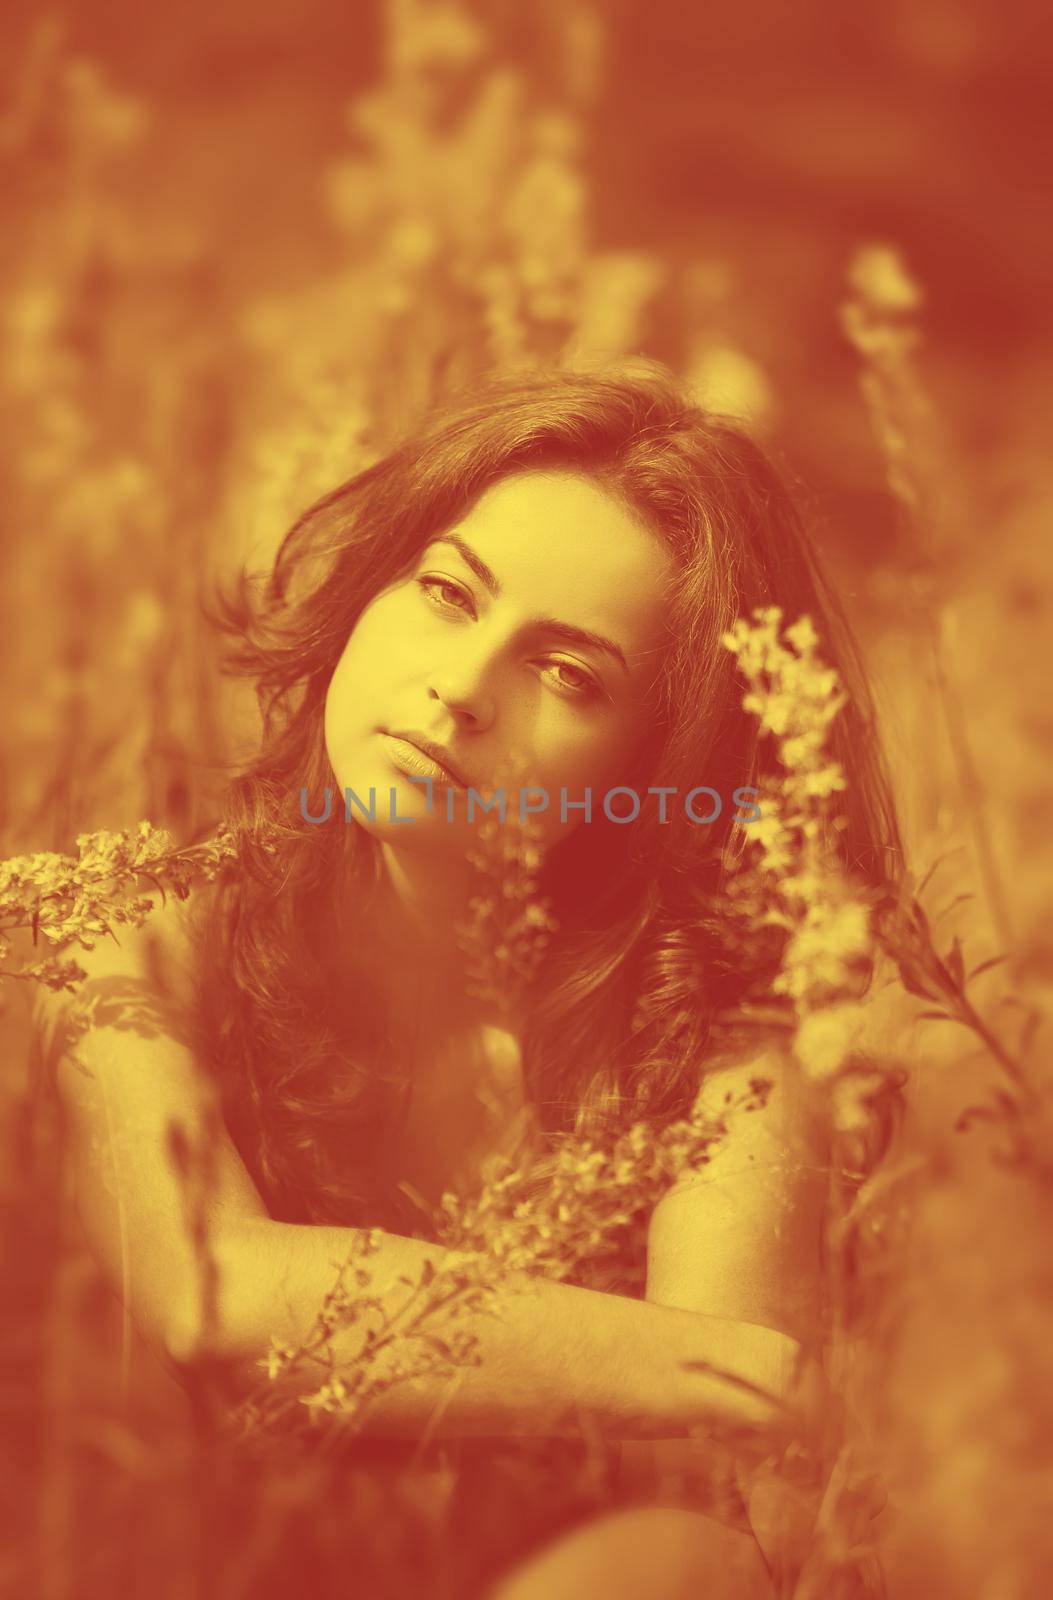 Duotone yellow and red image of young woman with wild flowers on background